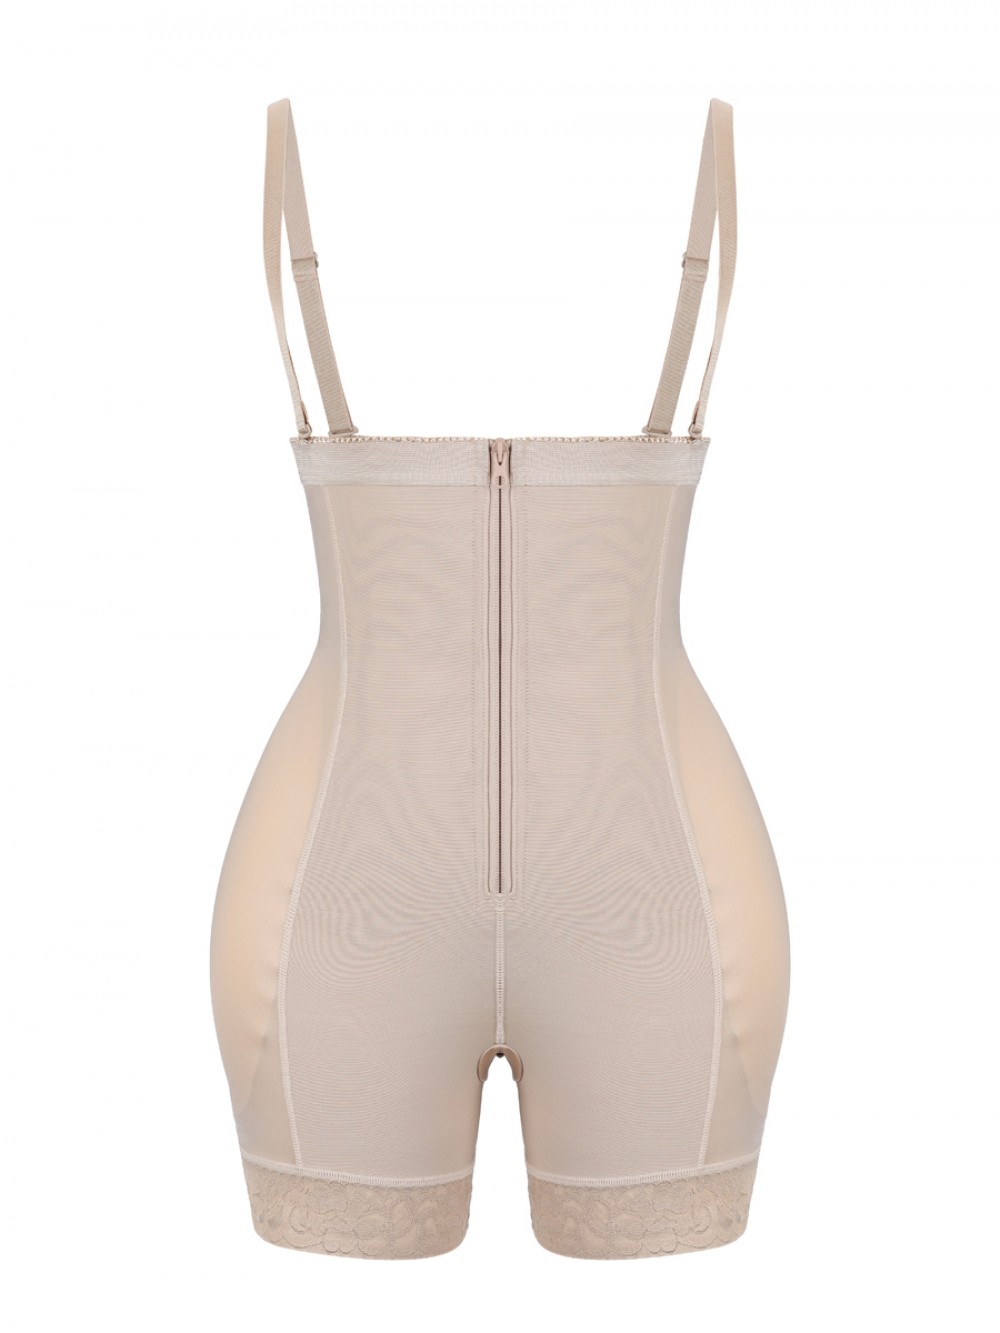 Nude Adjustable Straps Open Crotch Padded Hip Shapewear Soft-Touch